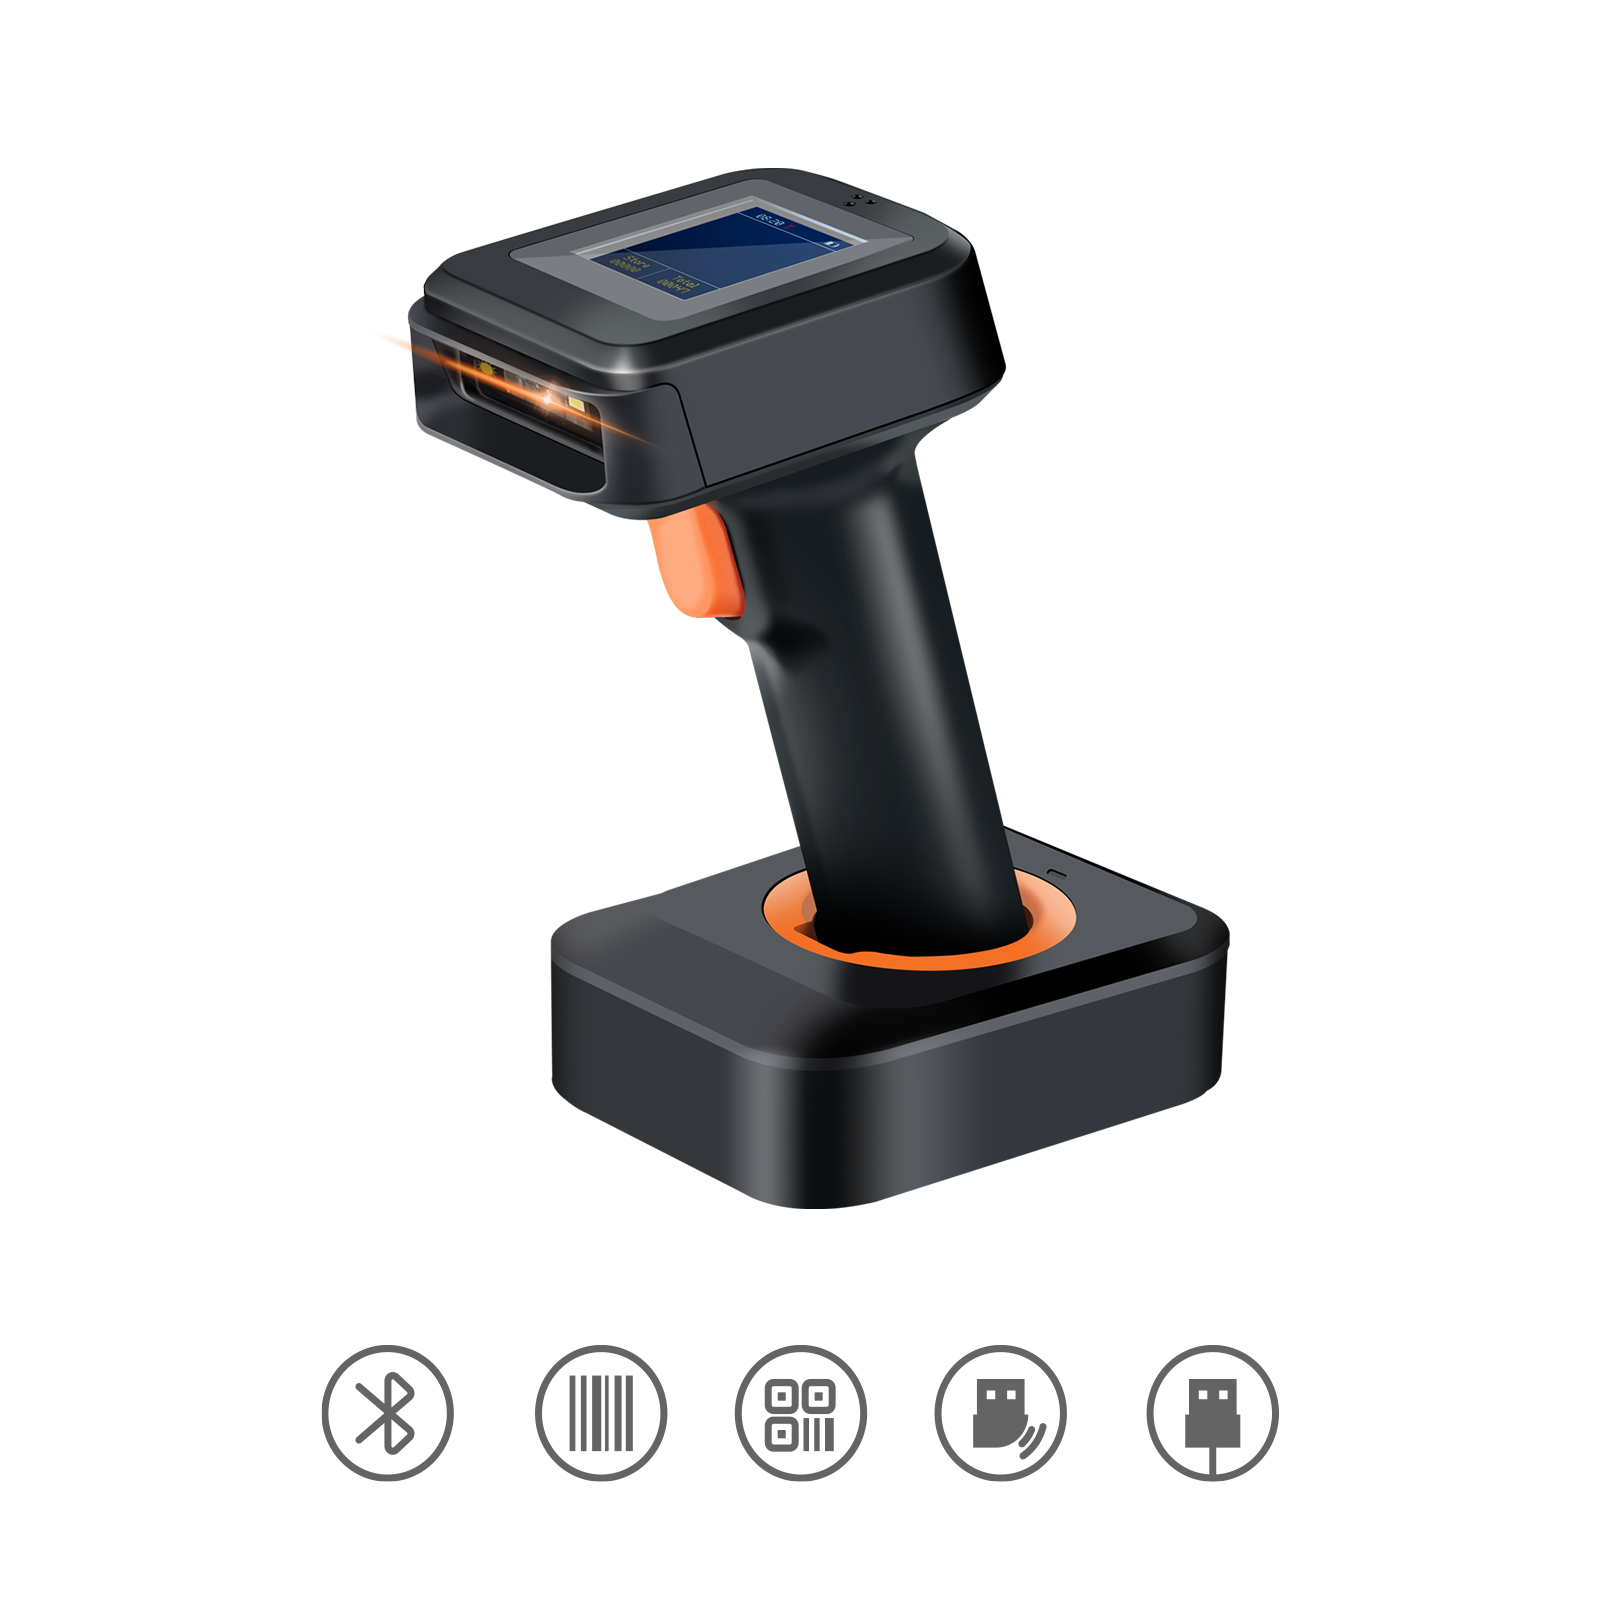 tera-hw0006pro-2d-wireless-barcode-scanner-with-display-screen